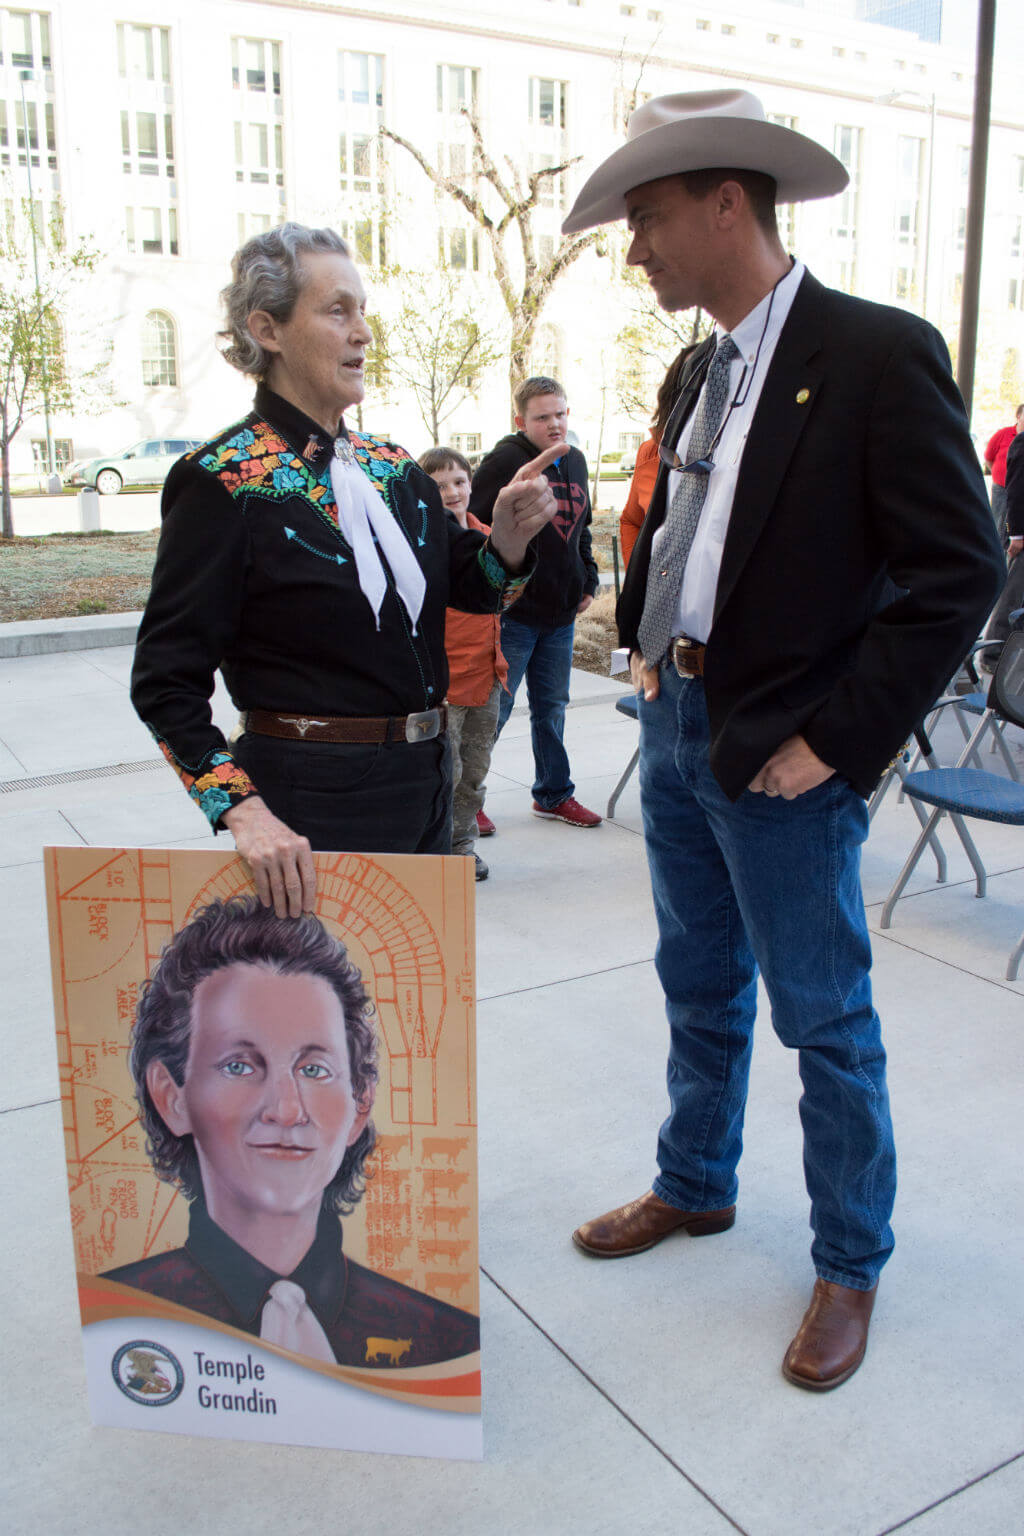 Image: Grandin with her USPTO inventor trading card, presented to her in 2016 at the USPTO Rocky Mountain Regional Office in Denver, Colorado.